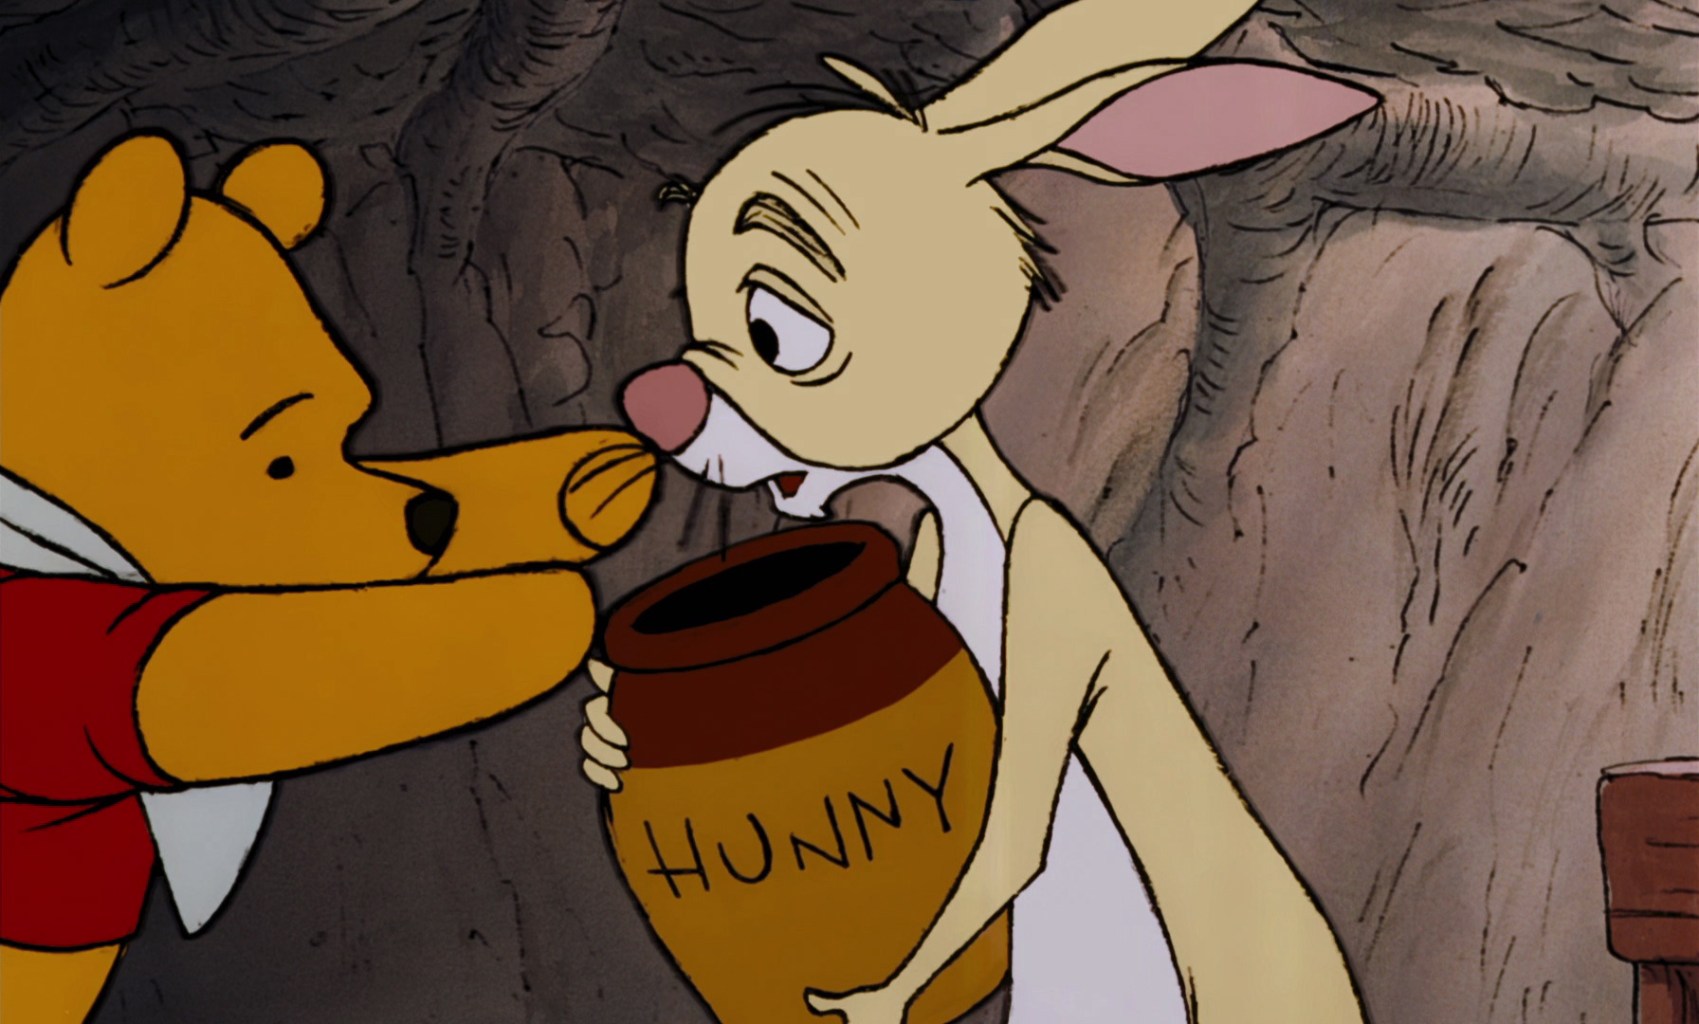 winnie_the_pooh_is_about_to_take_rabbits_honey_pot